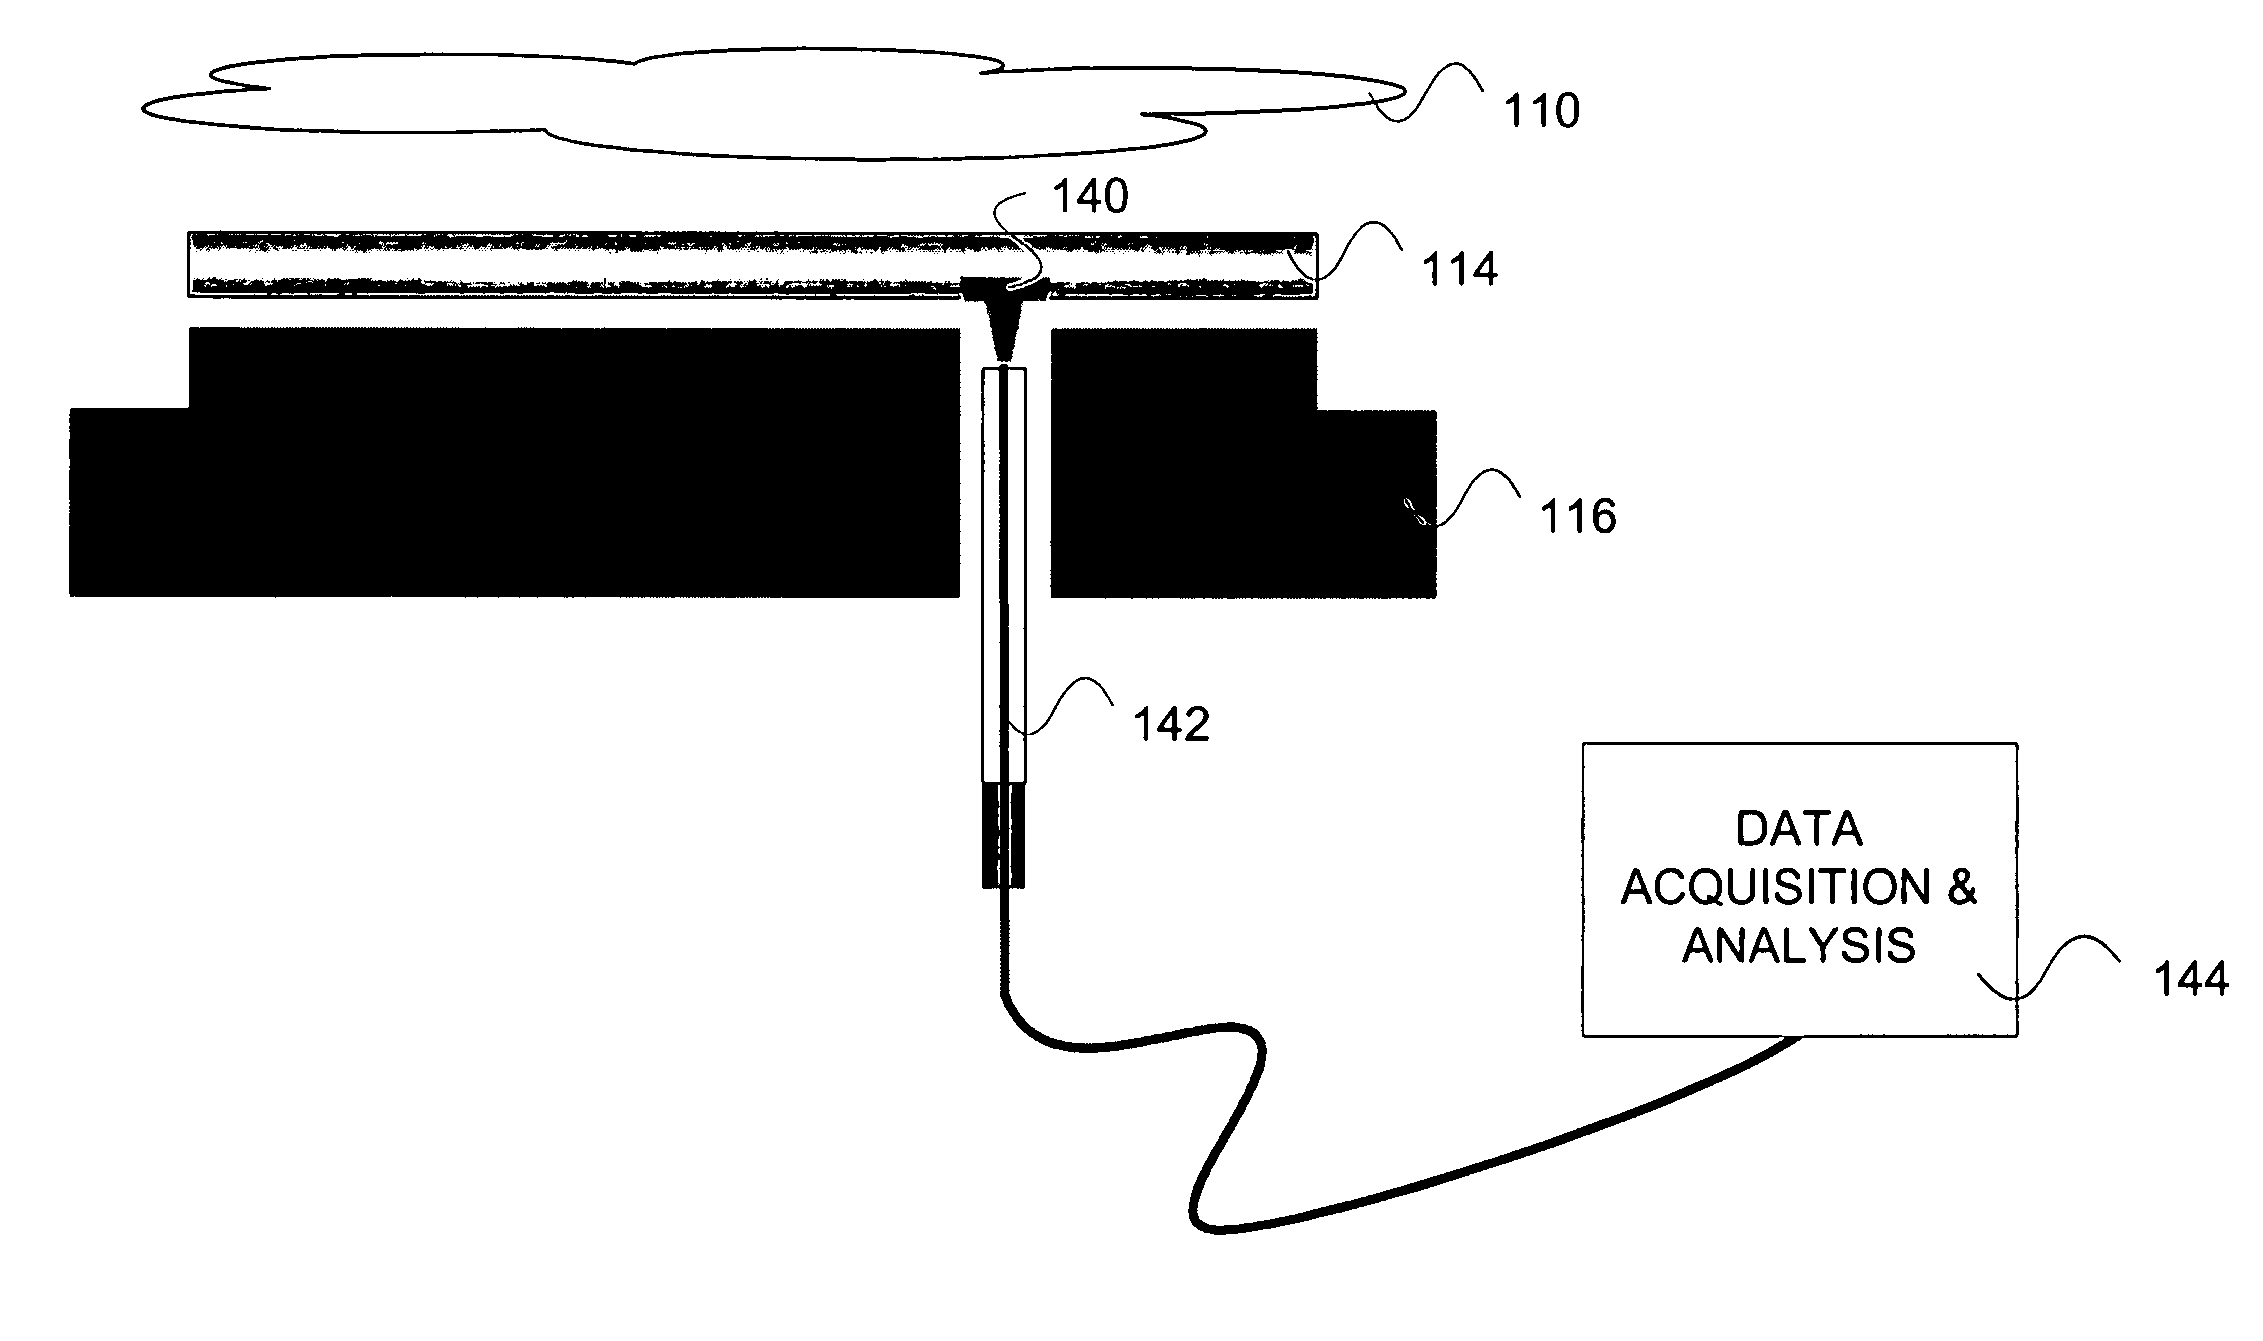 Apparatus for determining a temperature of a substrate and methods therefor